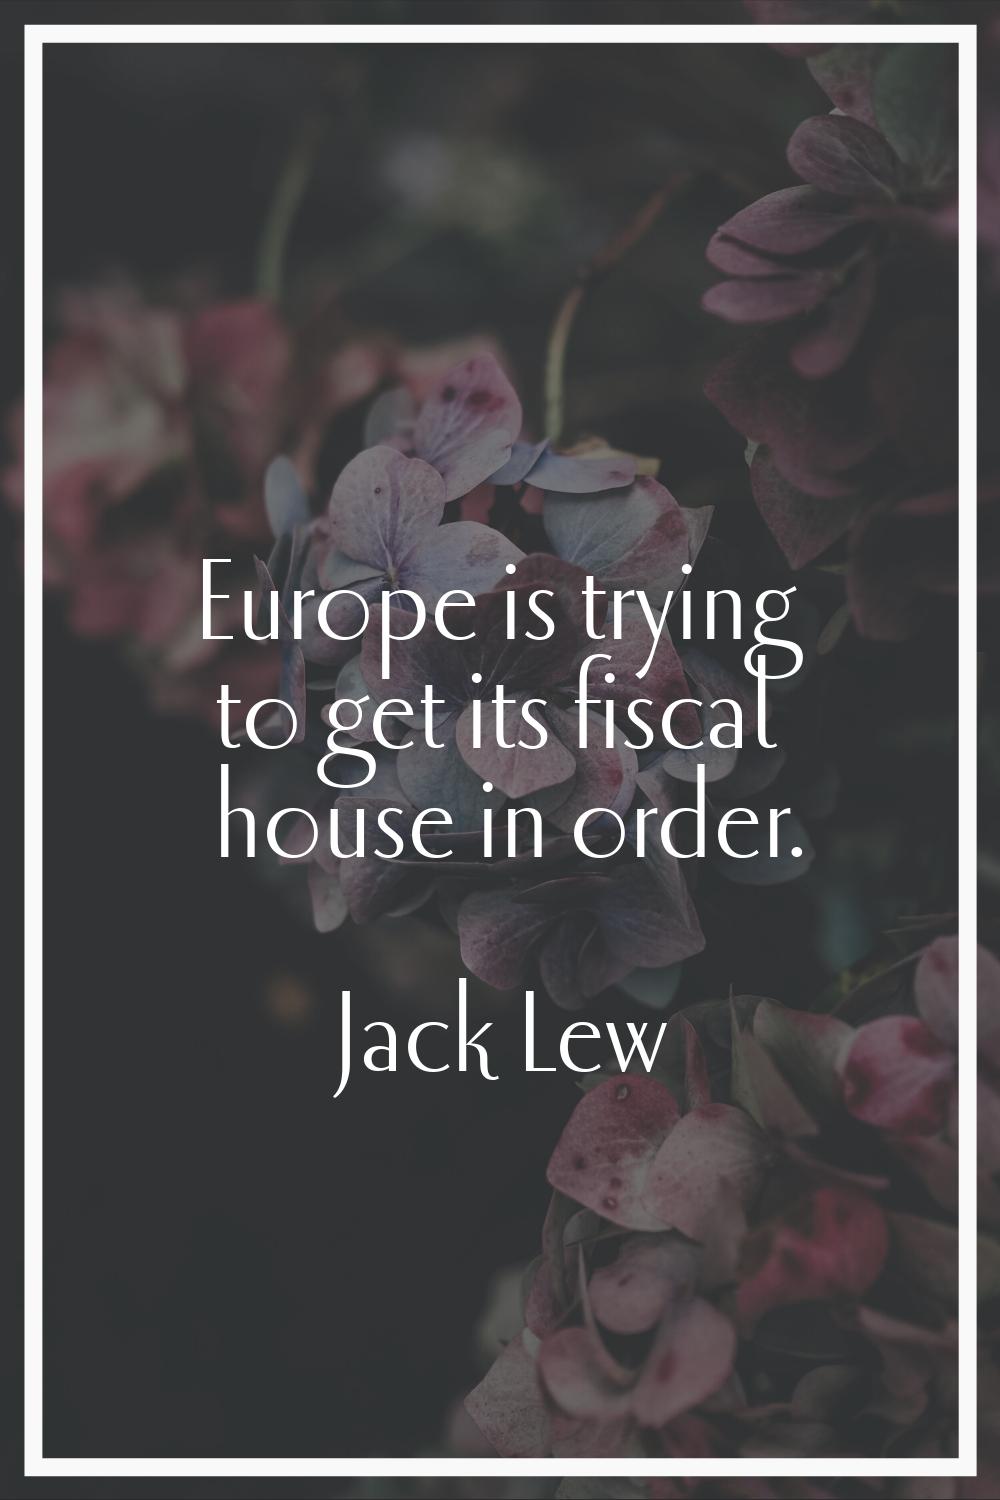 Europe is trying to get its fiscal house in order.